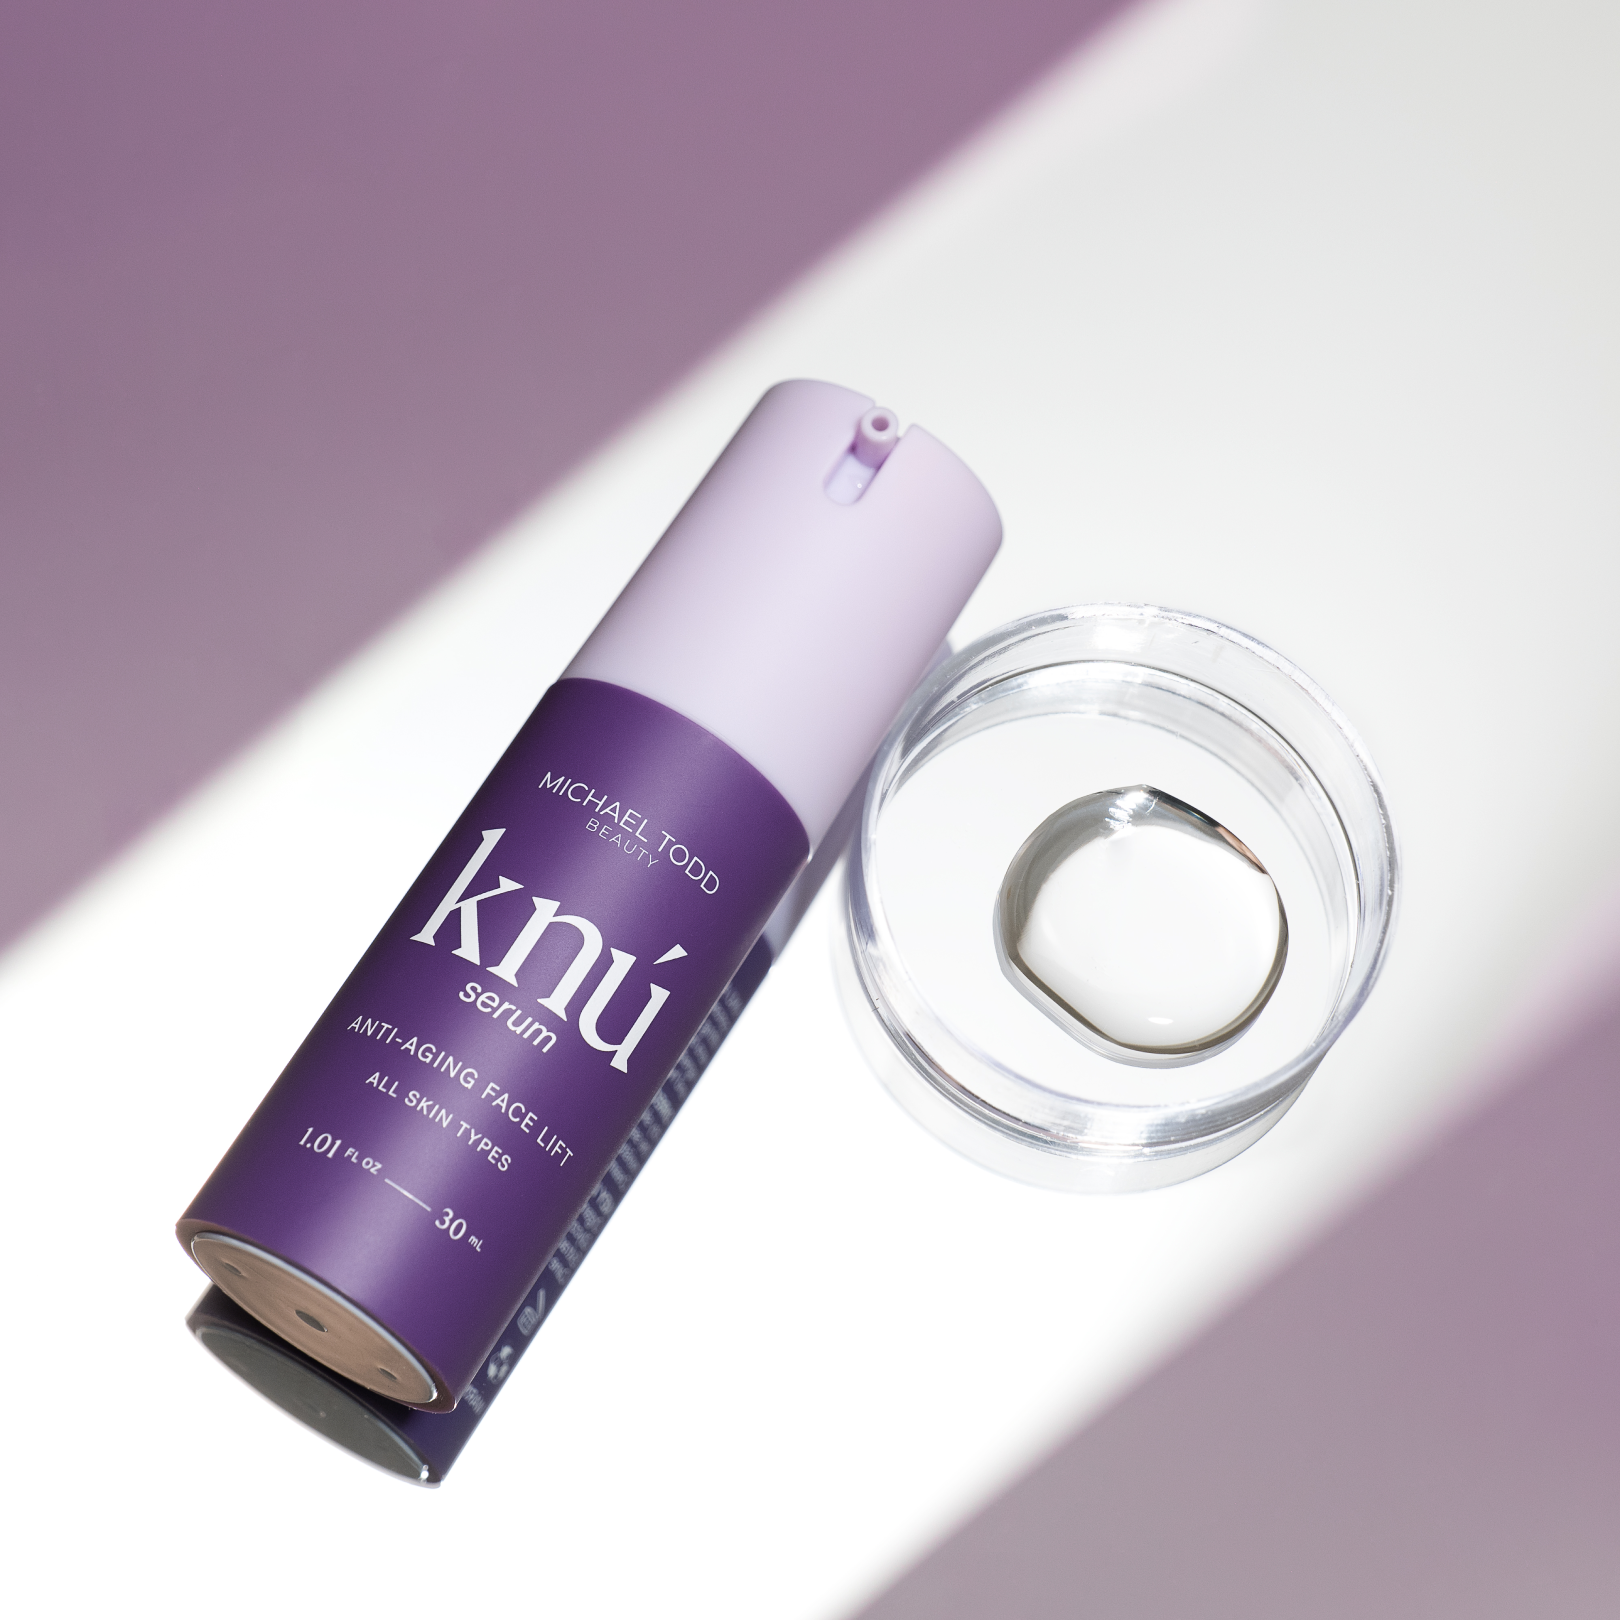 A bottle of Knú Ageless Duo serum with a ring next to it by Michael Todd Beauty.